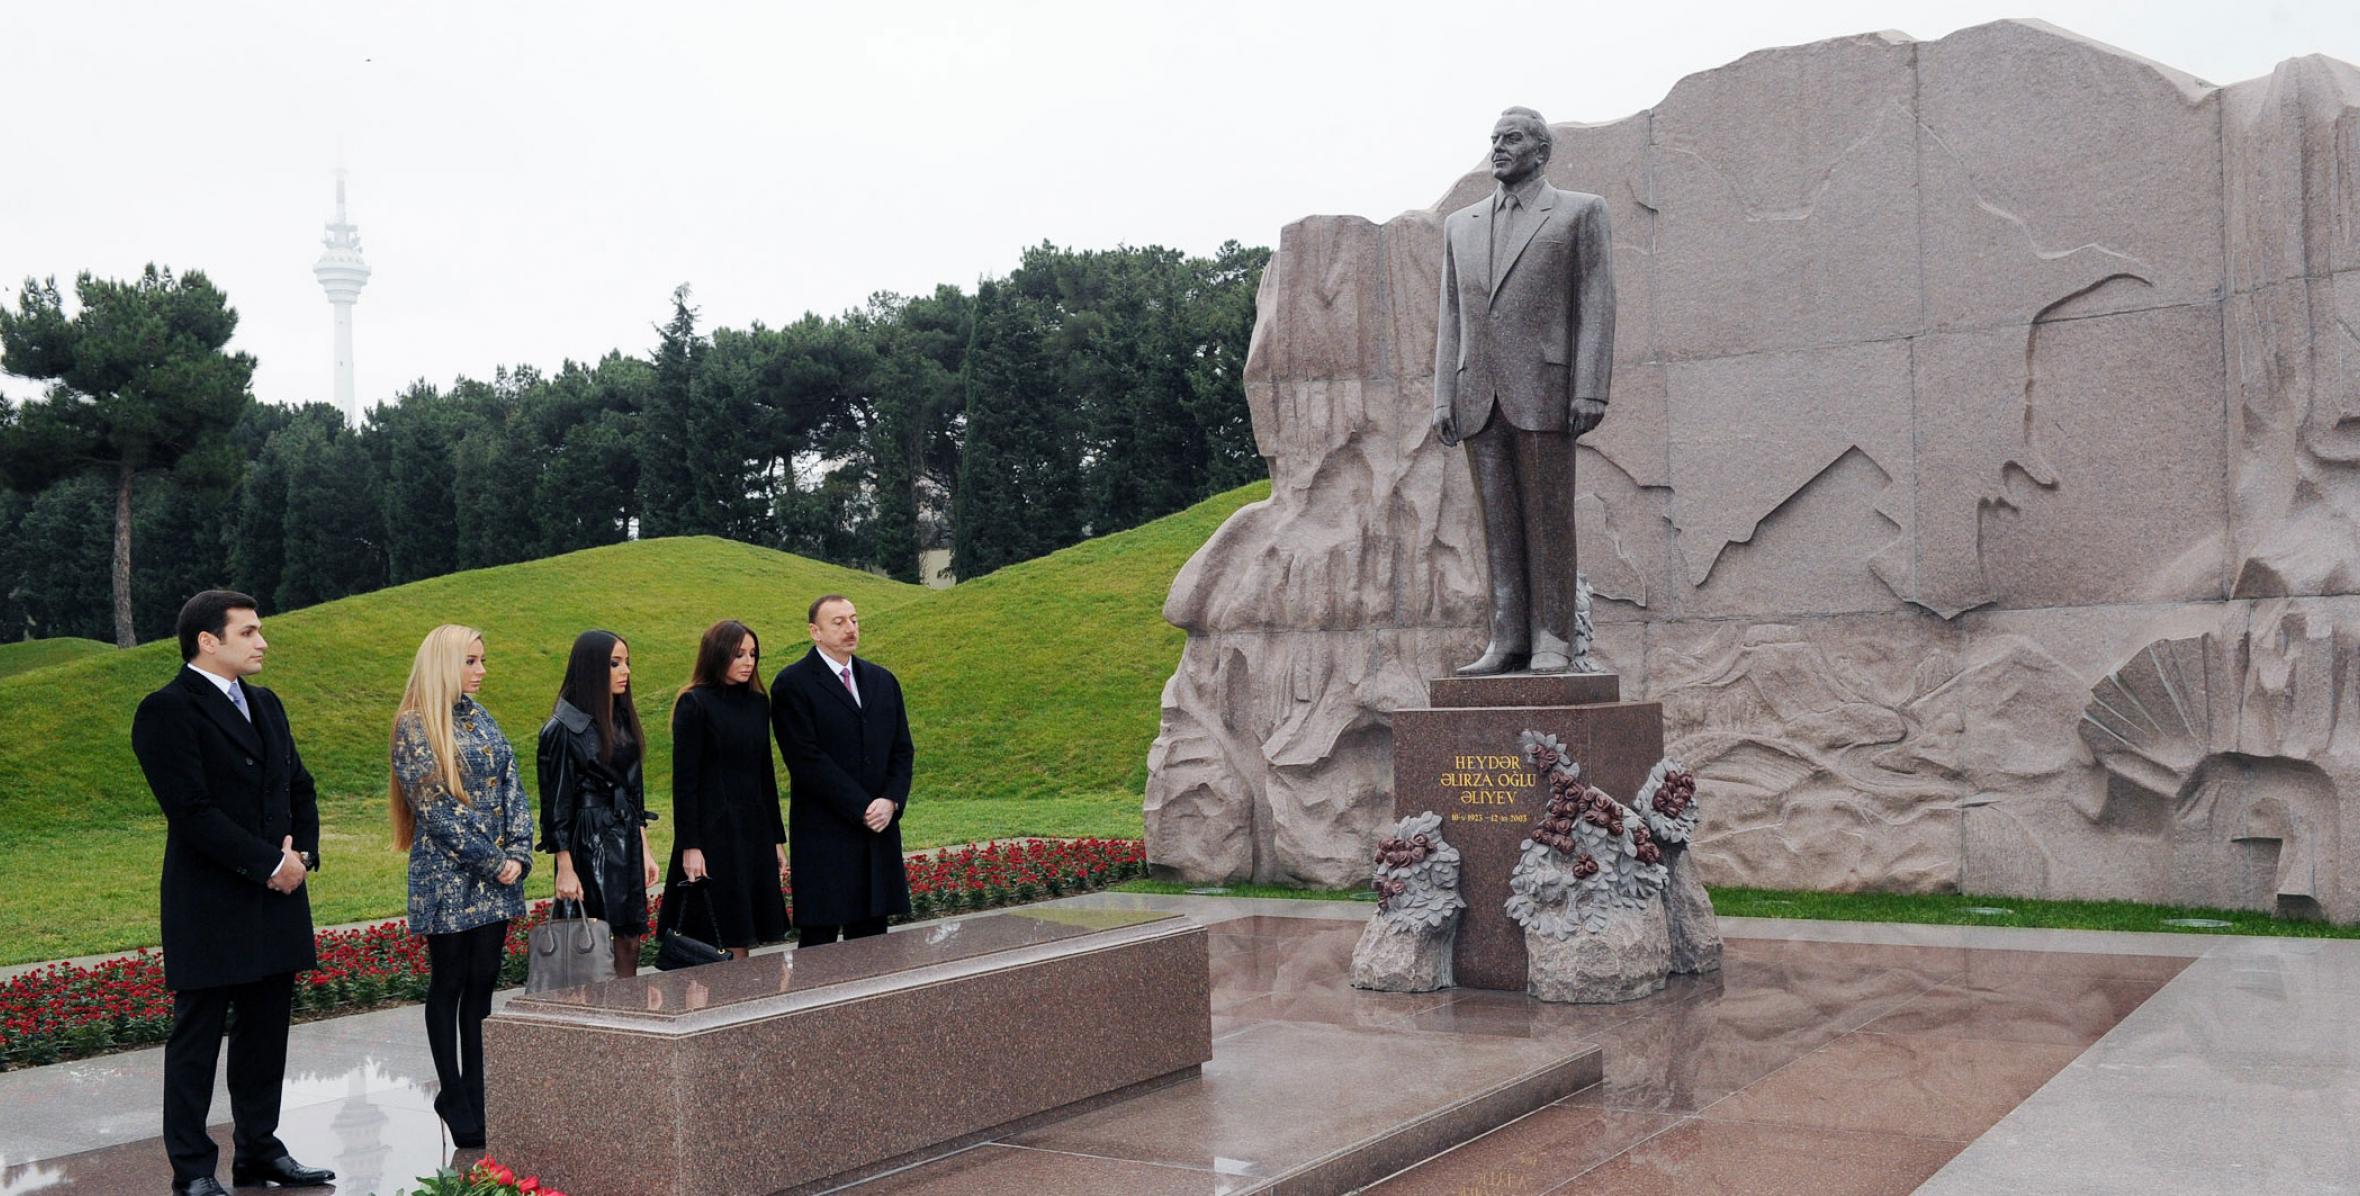 Ilham Aliyev and his family members visited the grave of great leader Heydar Aliyev